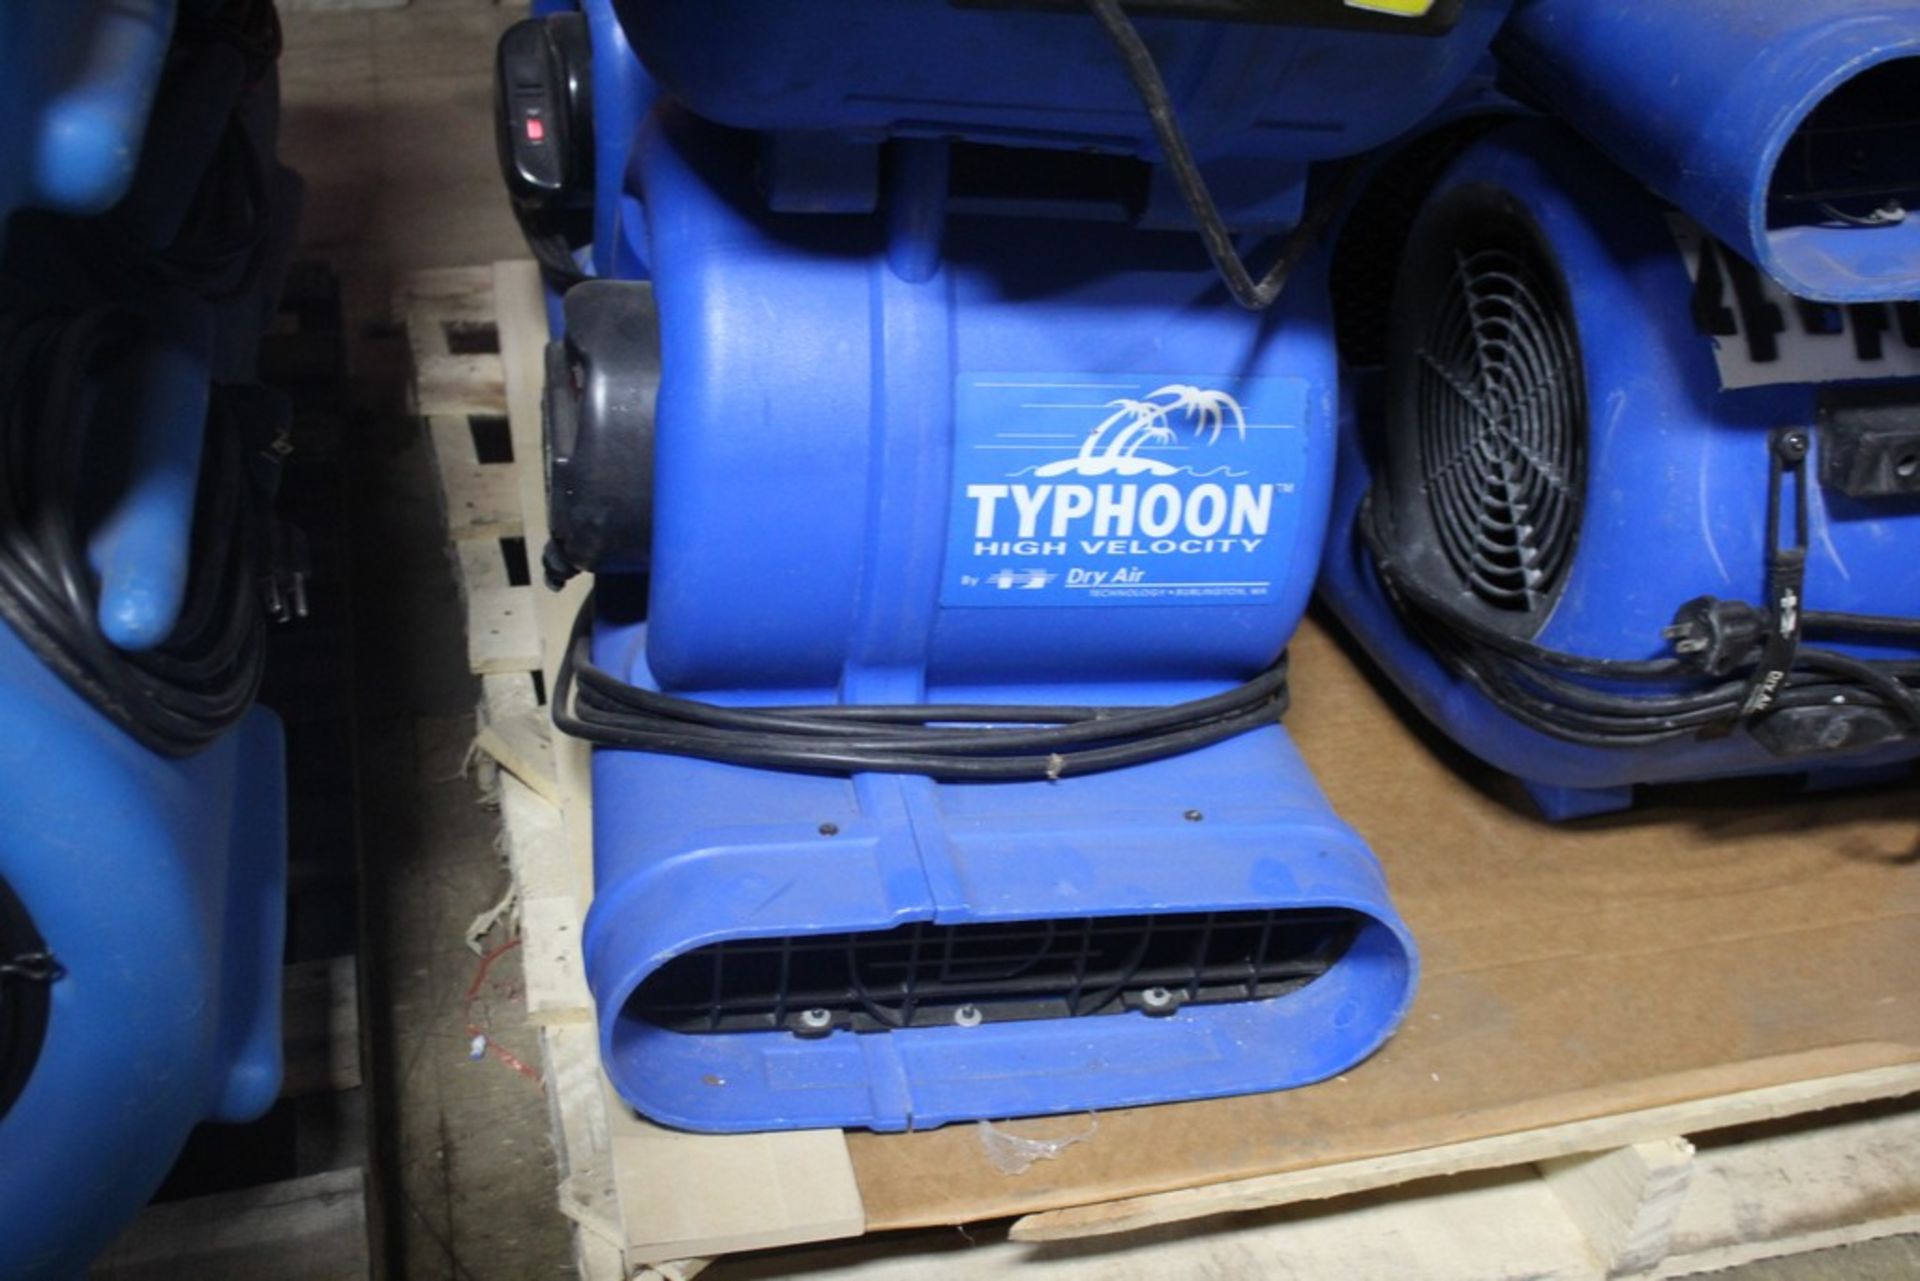 DRY AIR TYPHOON 3 SPEED AIR MOVER